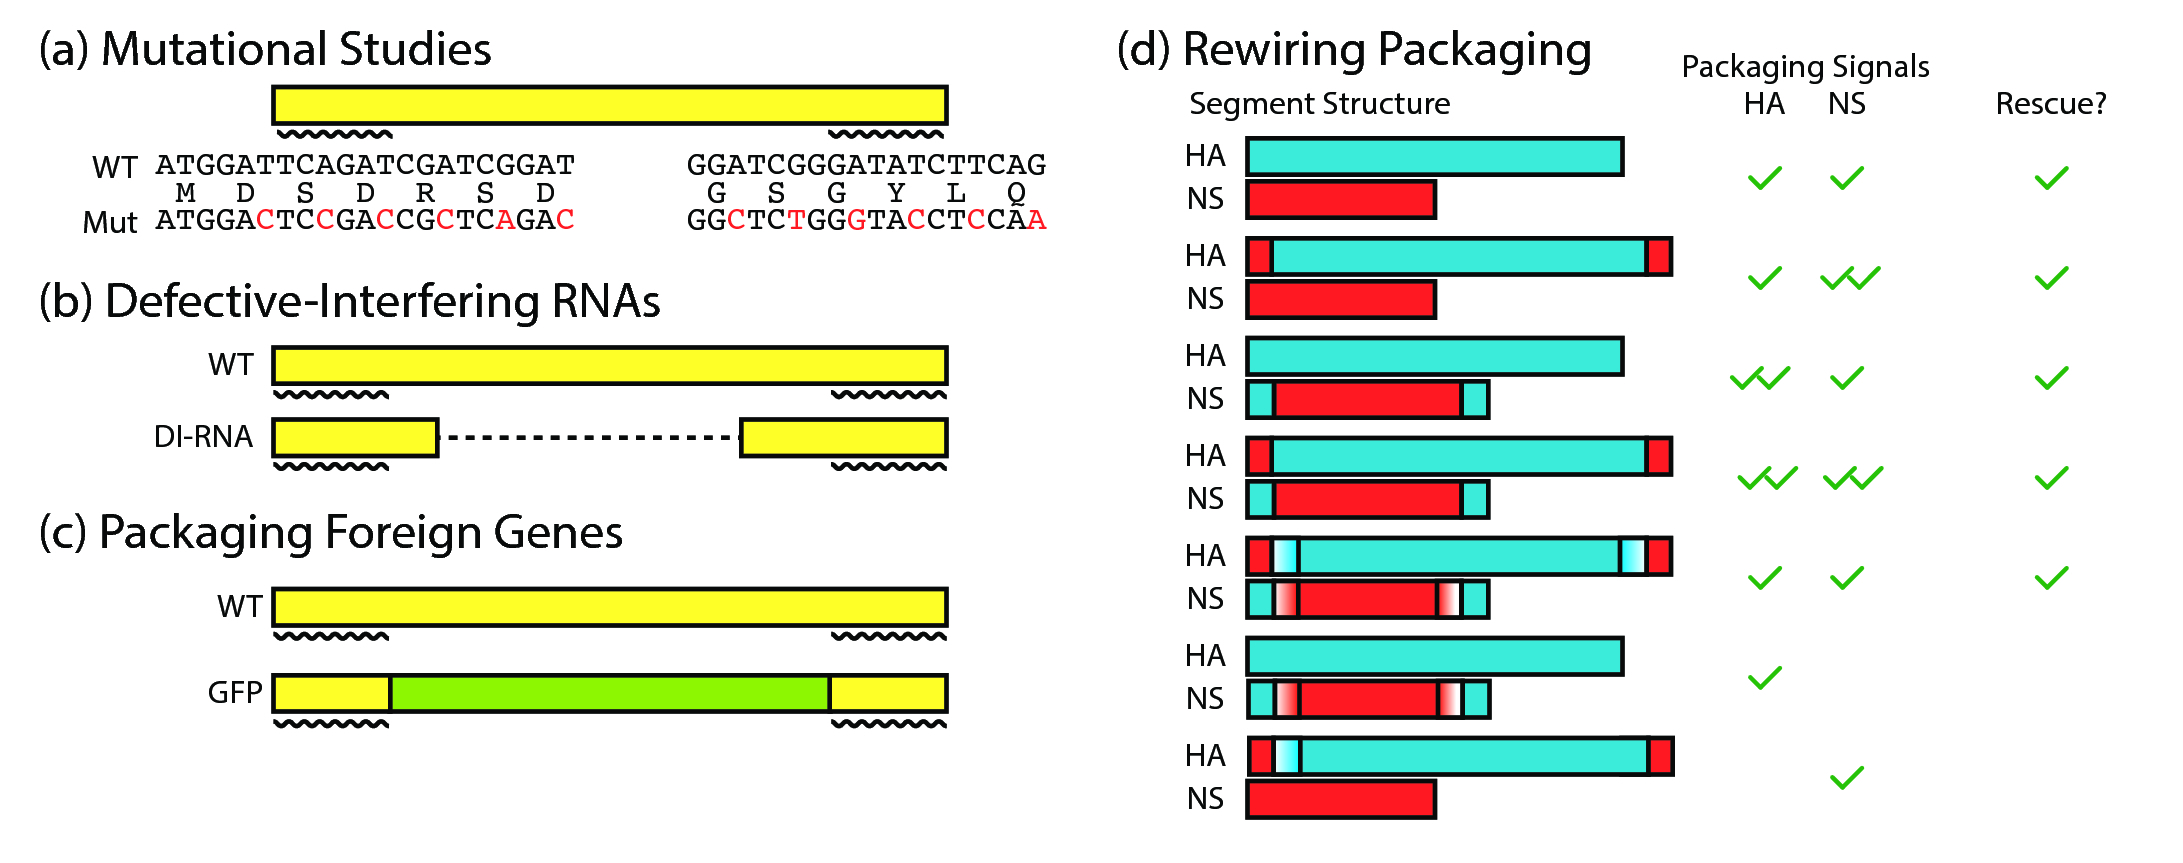 Figure 9: Summary of known results in influenza genome packaging. (a) Mutating the 3rd codon positions in the packaging regions reduces packaging efficiency, thus highlighting their importance. (b) Defective-interfering RNAs harbouring only the packaging signals can interfere with live virion production. (c) Foreign genes, such as GFP, have been packaged into the influenza virus by flanking them with packaging signals. (d) Packaging signals can be swapped between segments, but a packaging signal sequence must be present on each gene in order to rescue live virus.